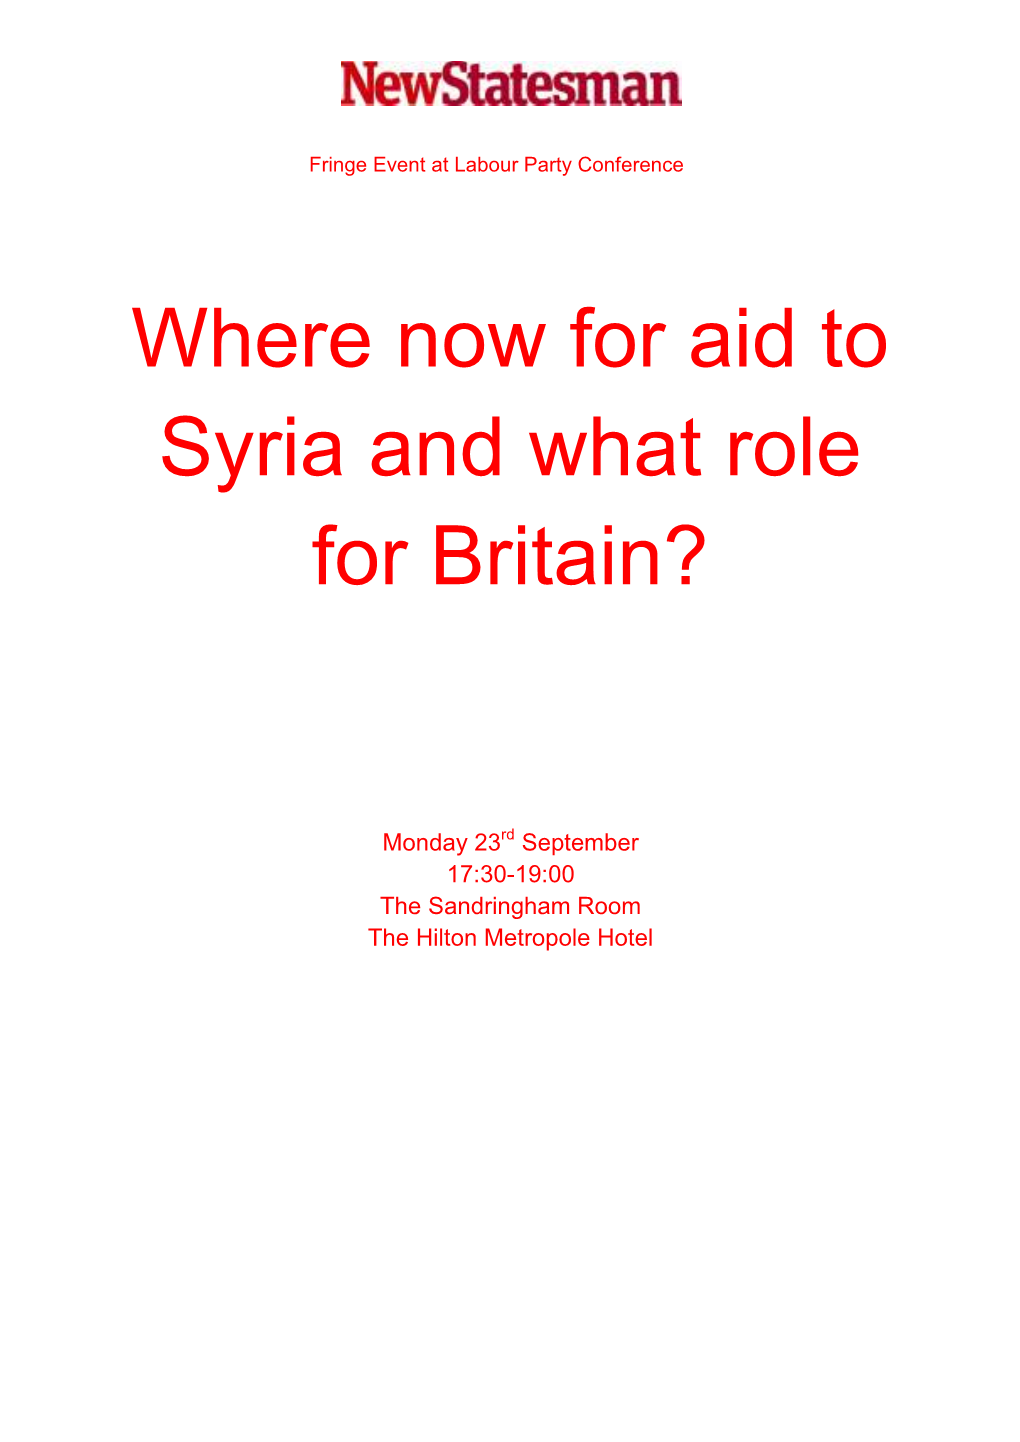 Where Now for Aid to Syria and What Role for Britain?